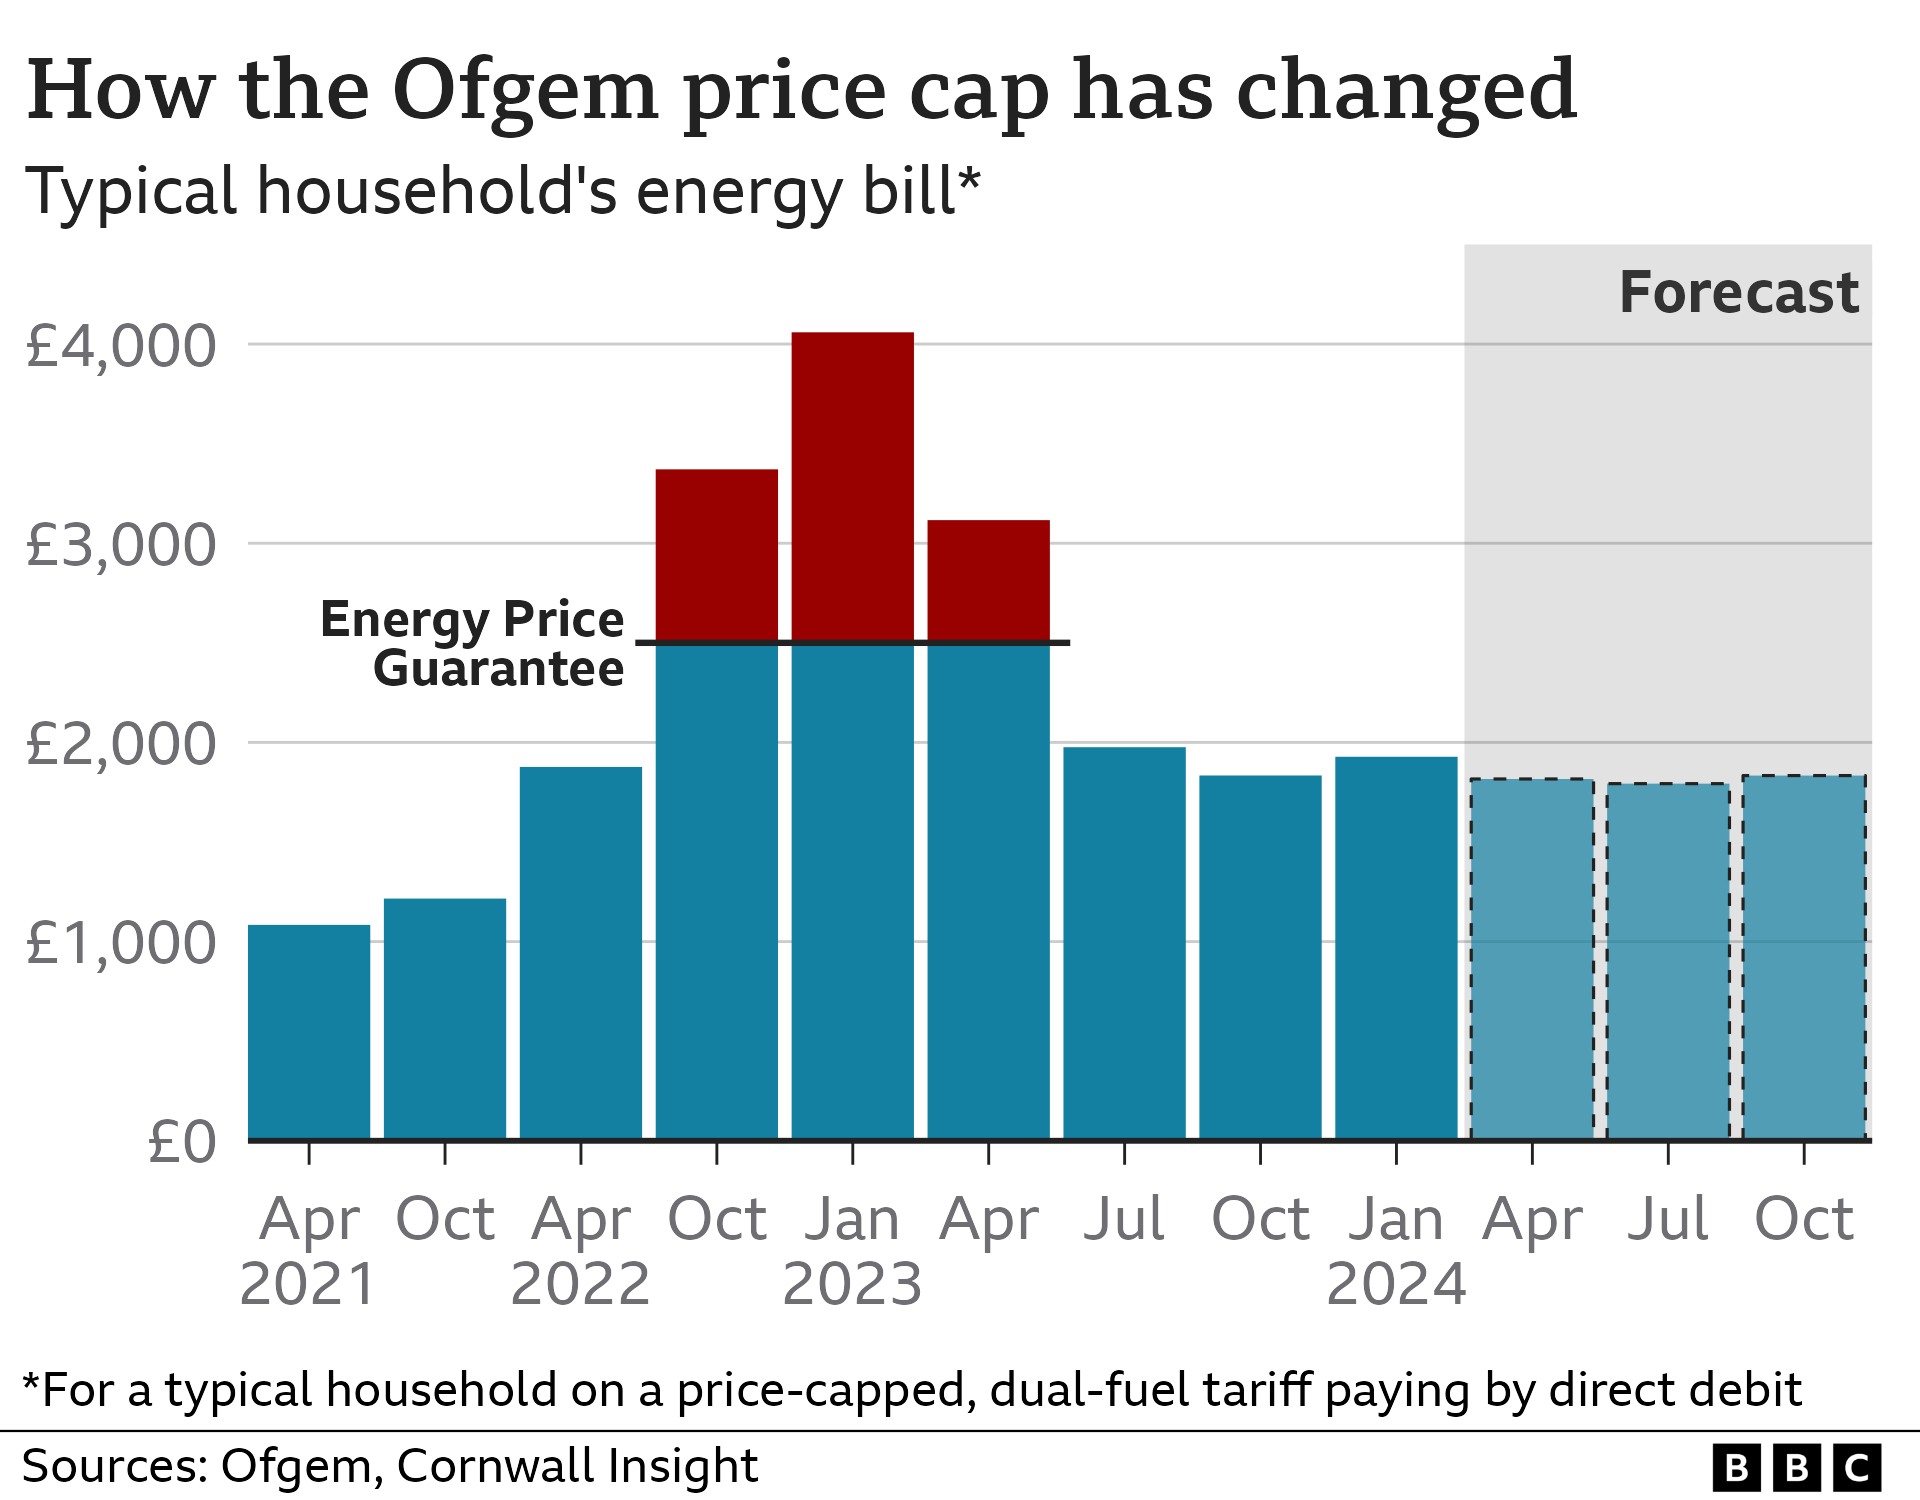 Chart showing the Ofgem price cap for a typical household on a price-capped, dual-fuel tariff paying by direct debit will be about £1,928 between January to March 2024.